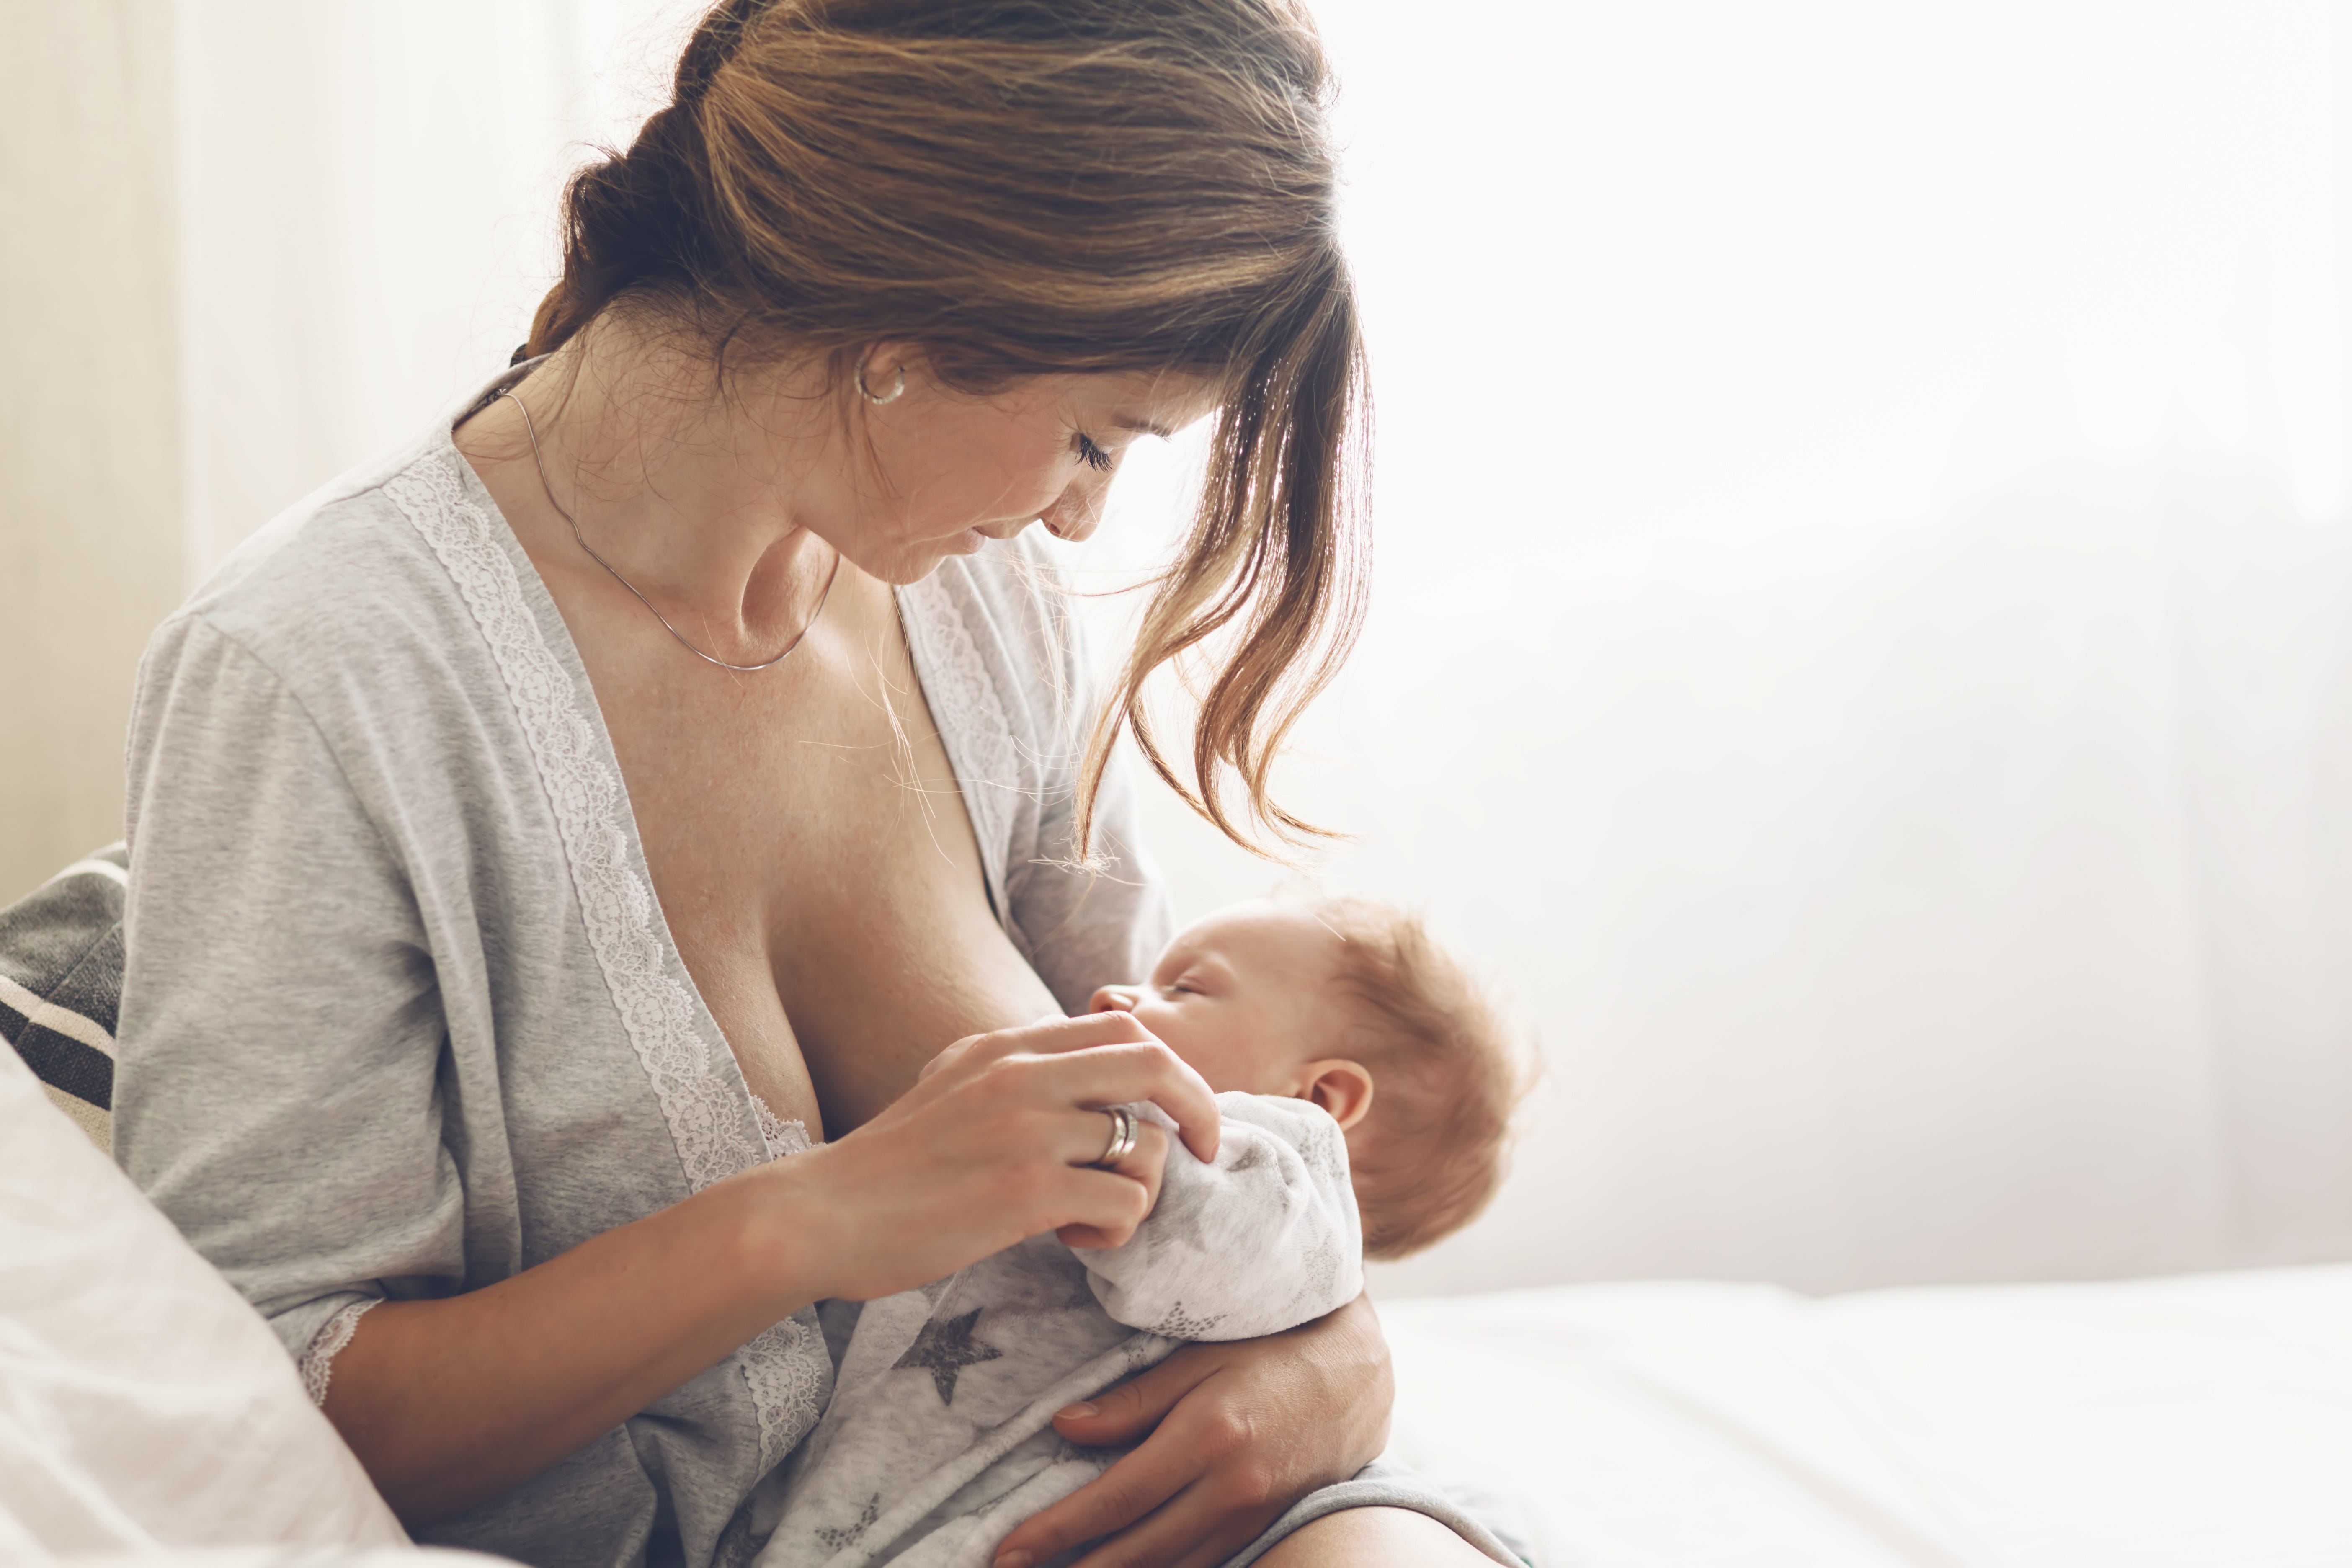 Mom holding baby and is breastfeeding baby